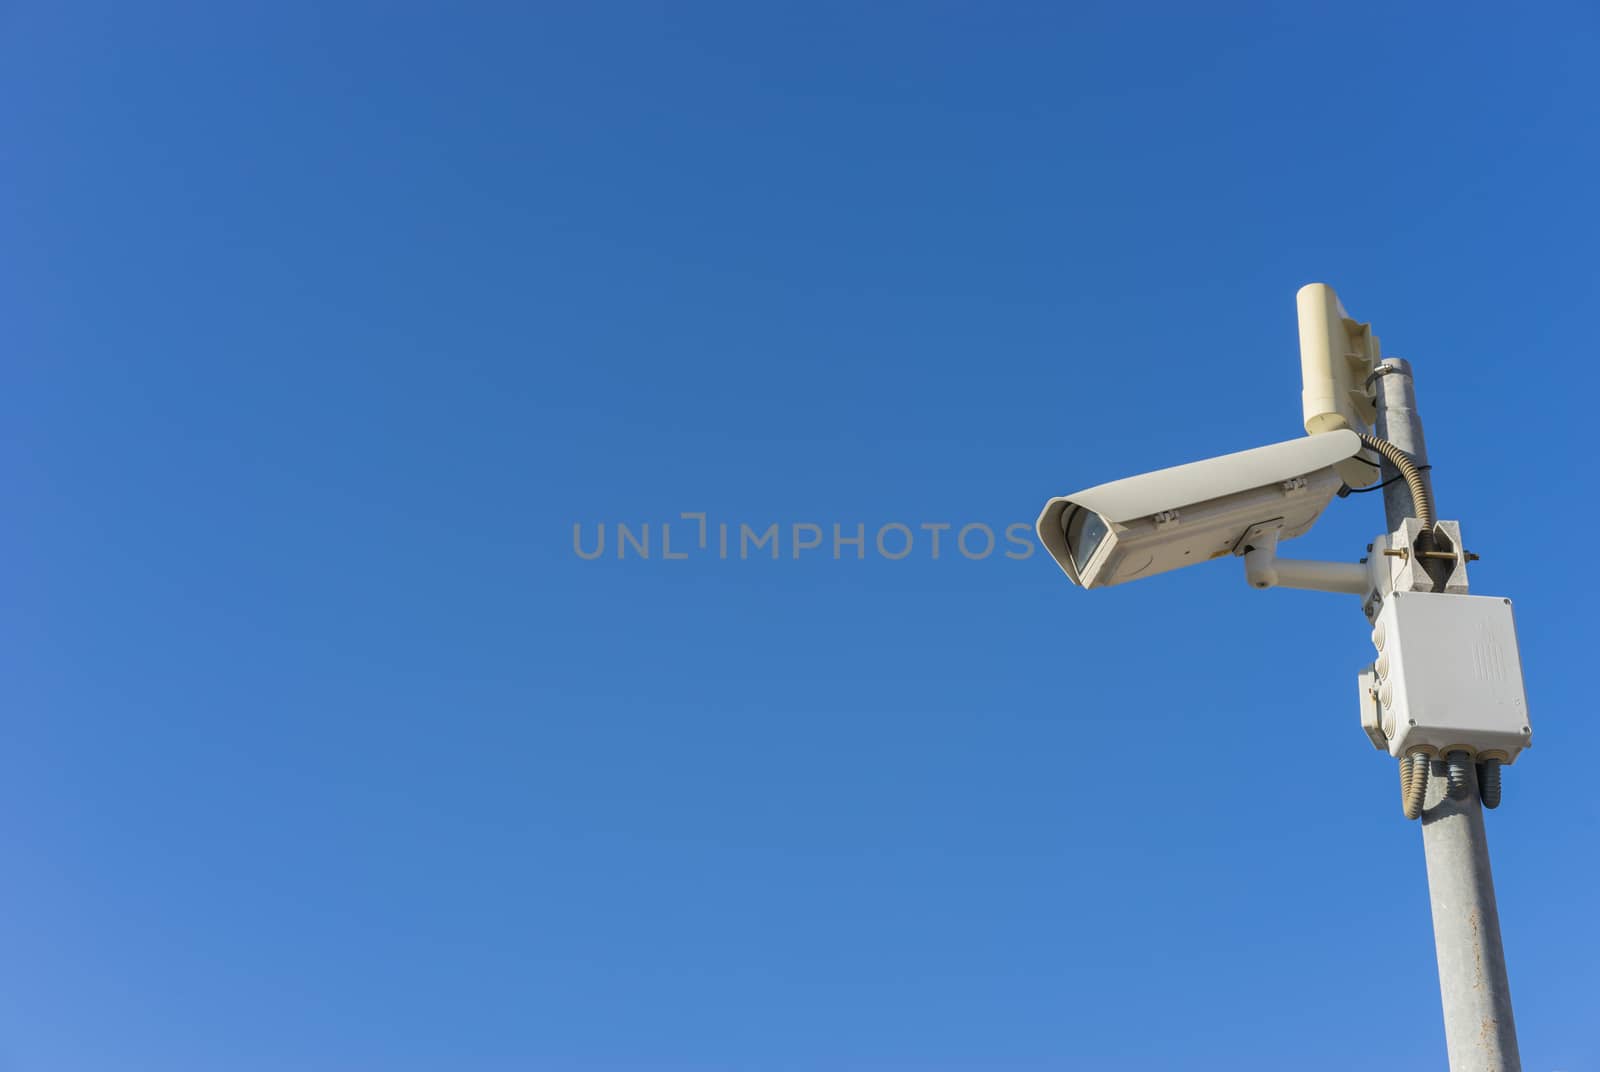 Security camera on pole with blue sky background and copy space